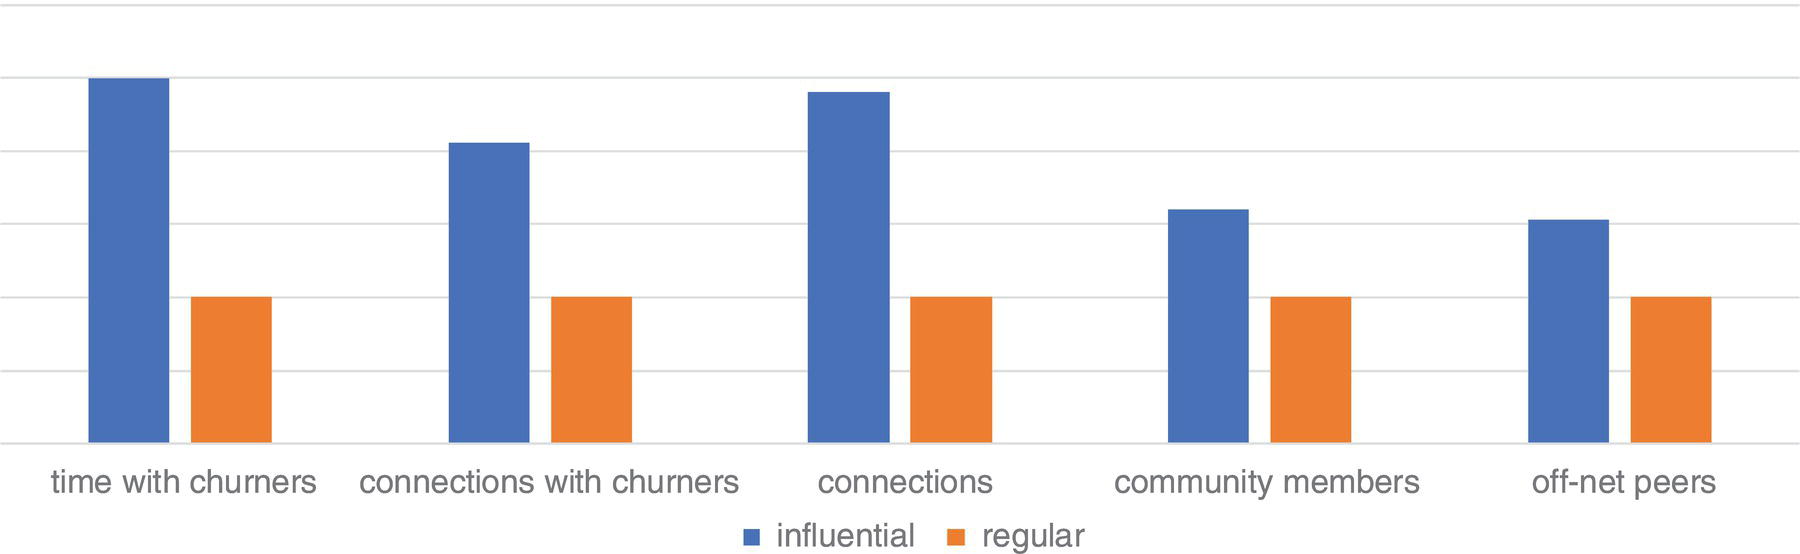 Schematic illustration of profile of influencers and regular churners.